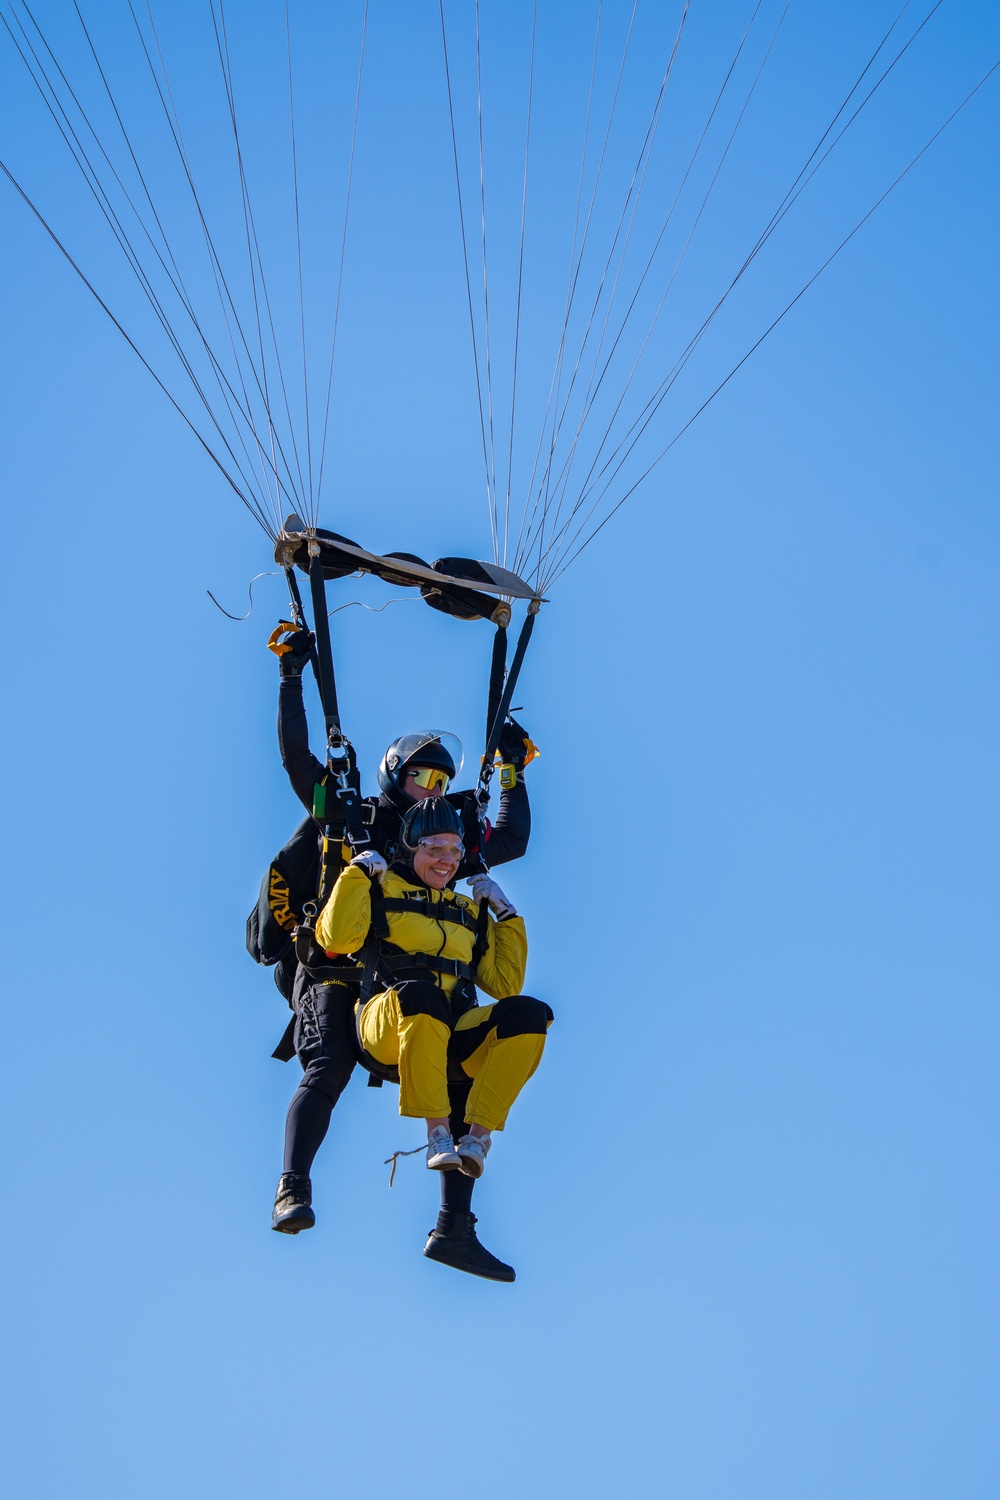 The U.S. Army Parachute Team skydives in southern Illinois